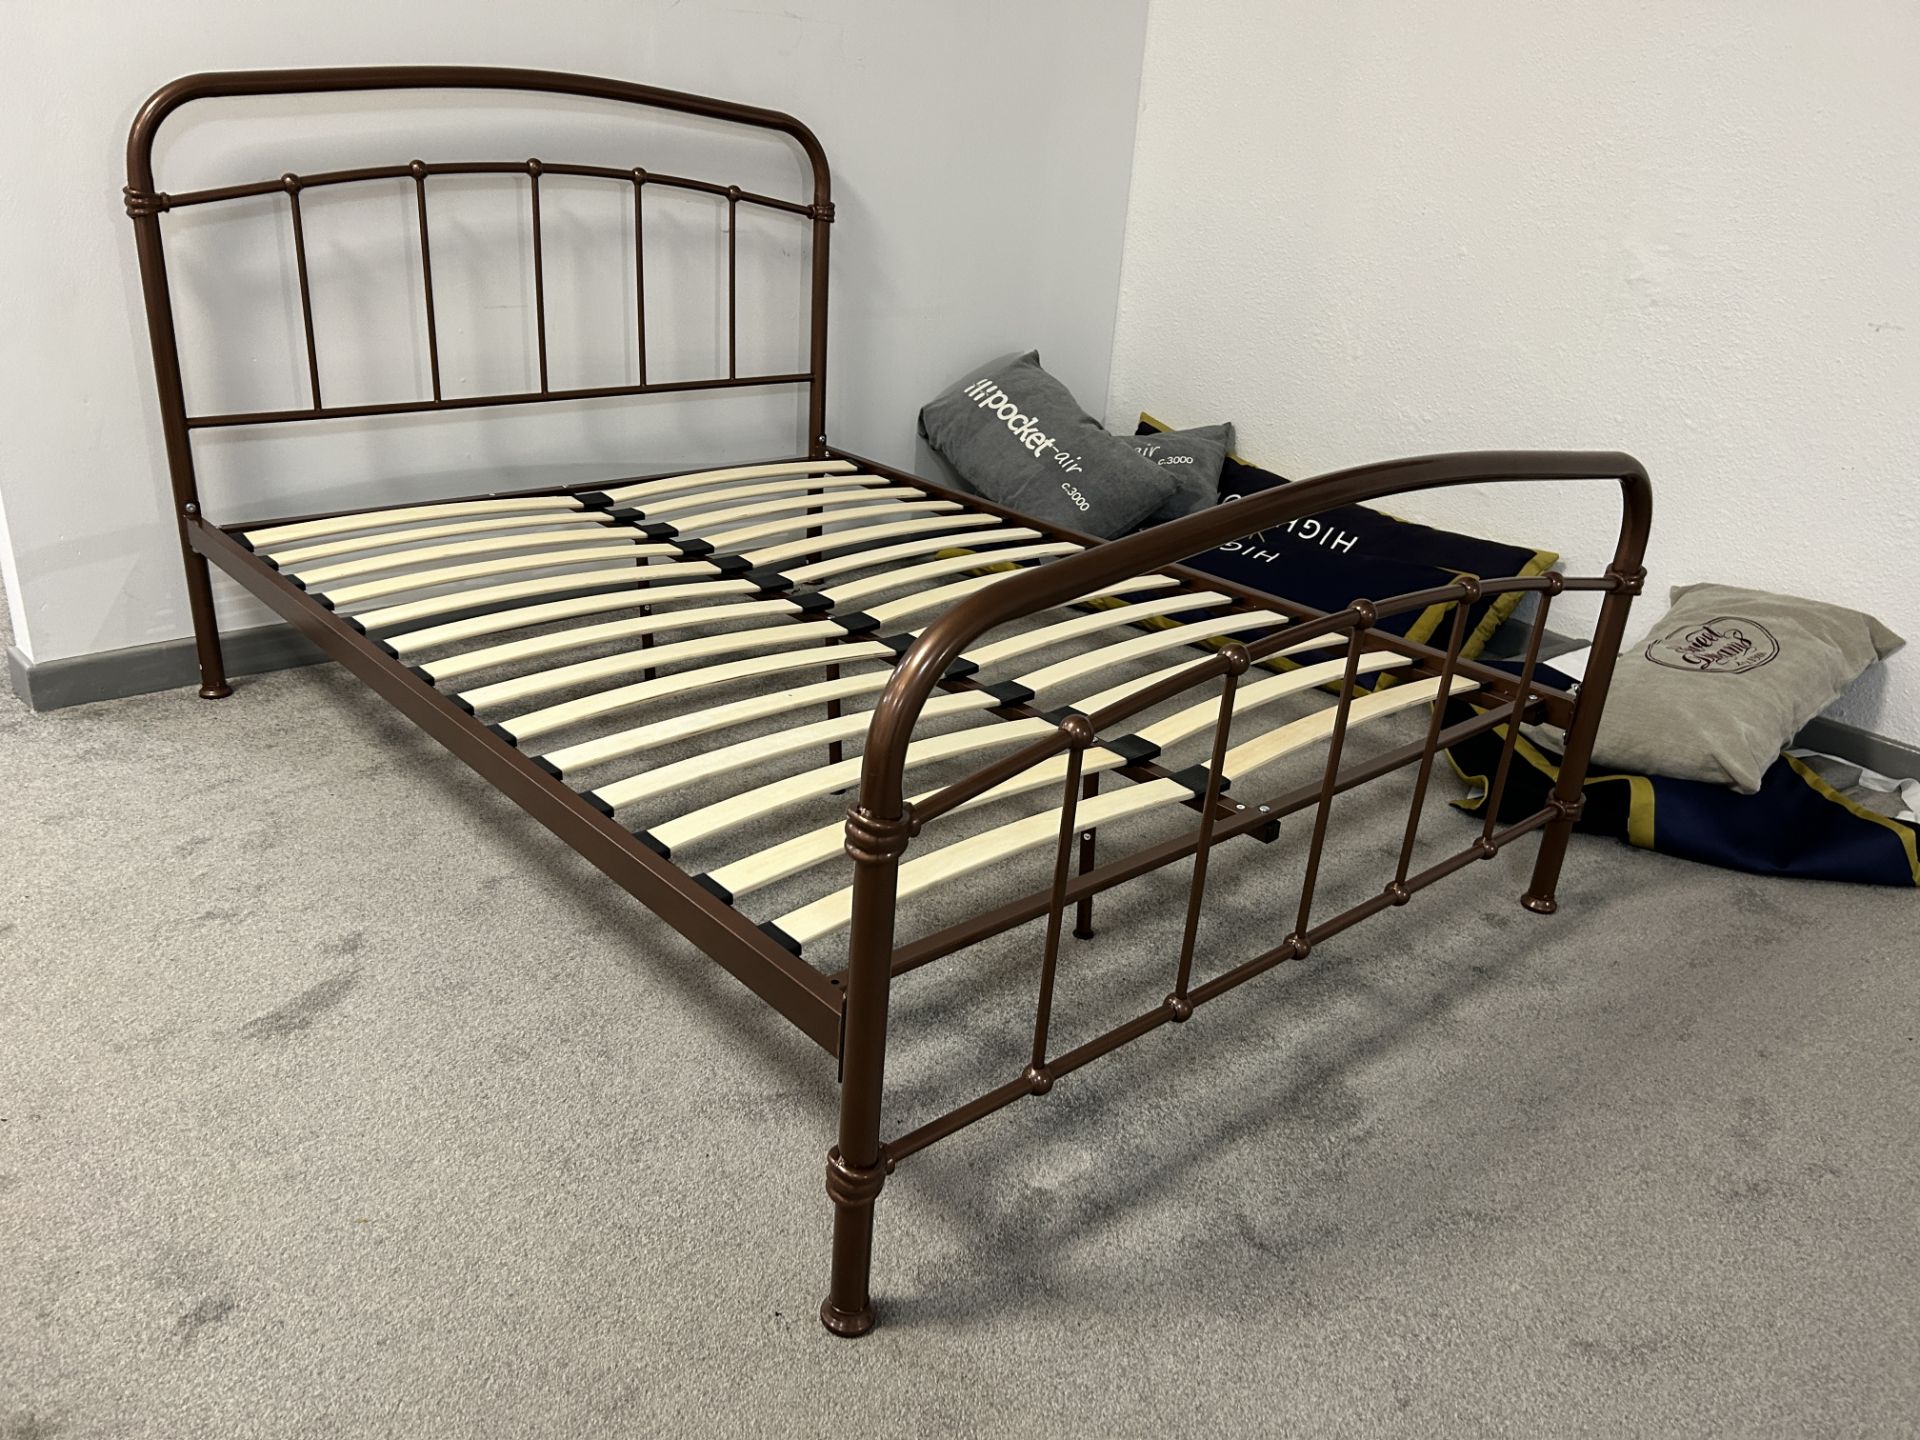 Ex-Display Double Size Metal Bed Frame Set - Image 3 of 3